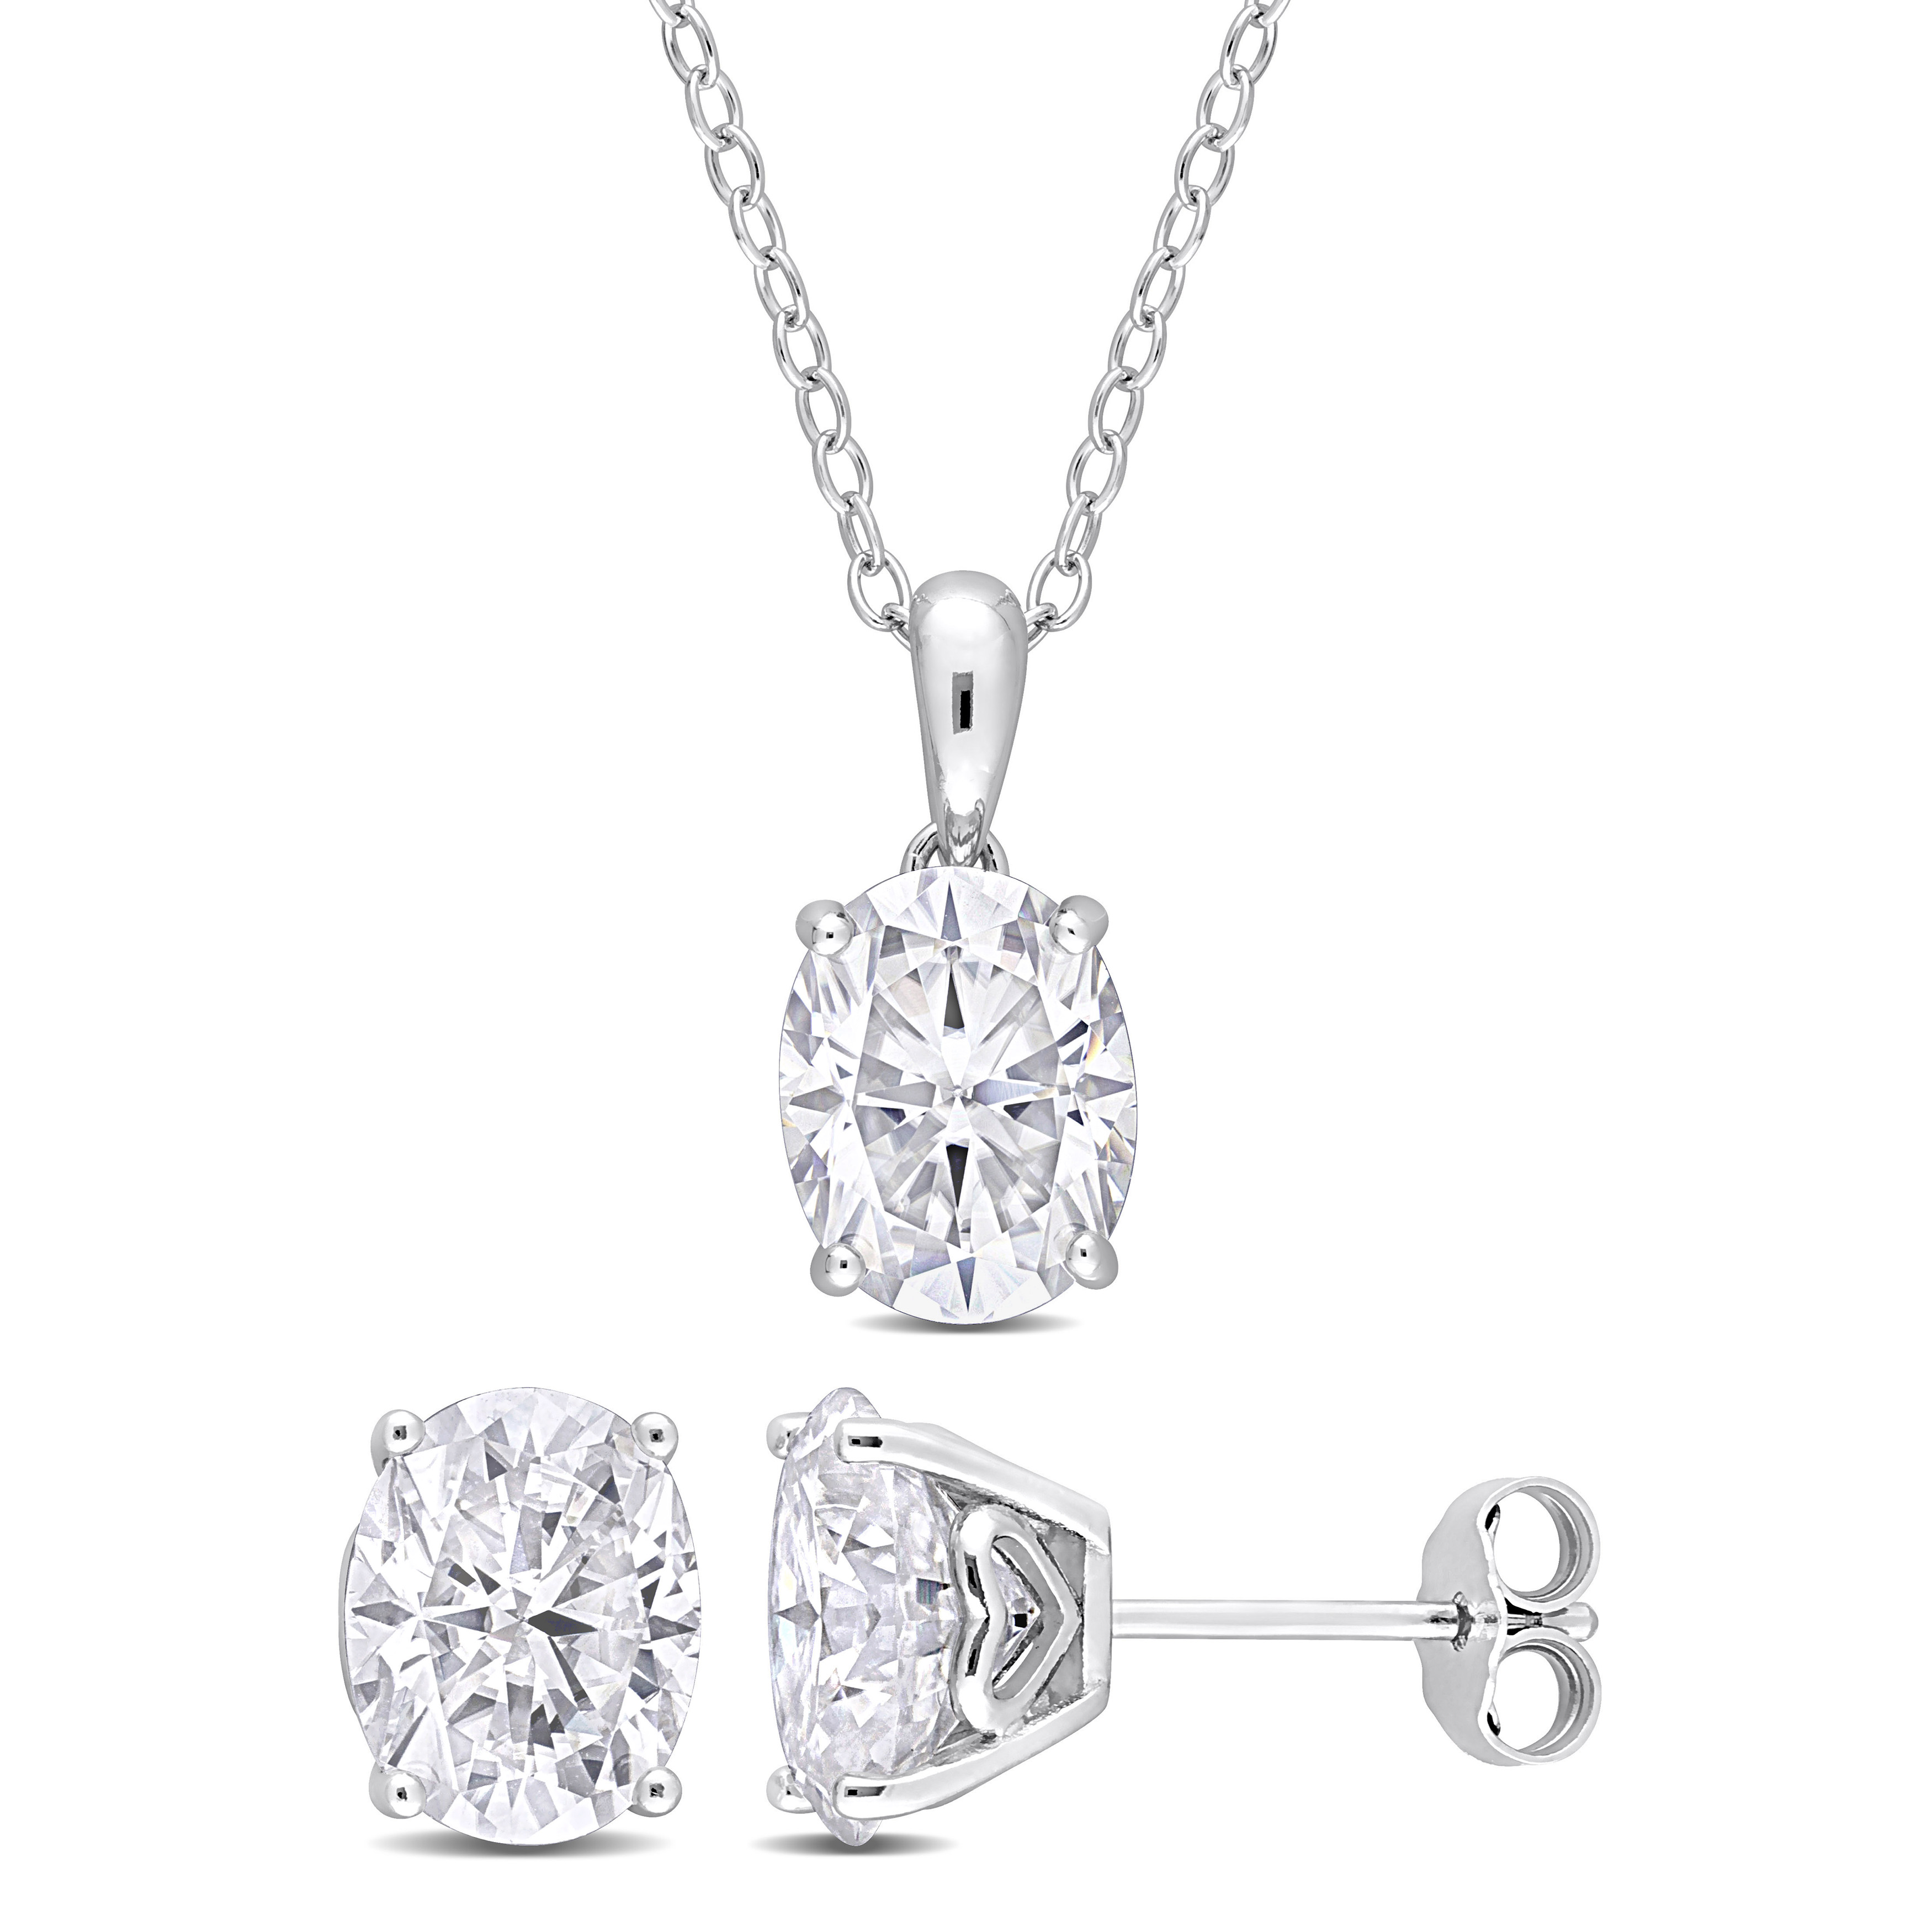 6 CT TGW Oval Created Moissanite 2-Piece Solitaire Pendant with Chain and Stud Earrings Set in Sterling Silver